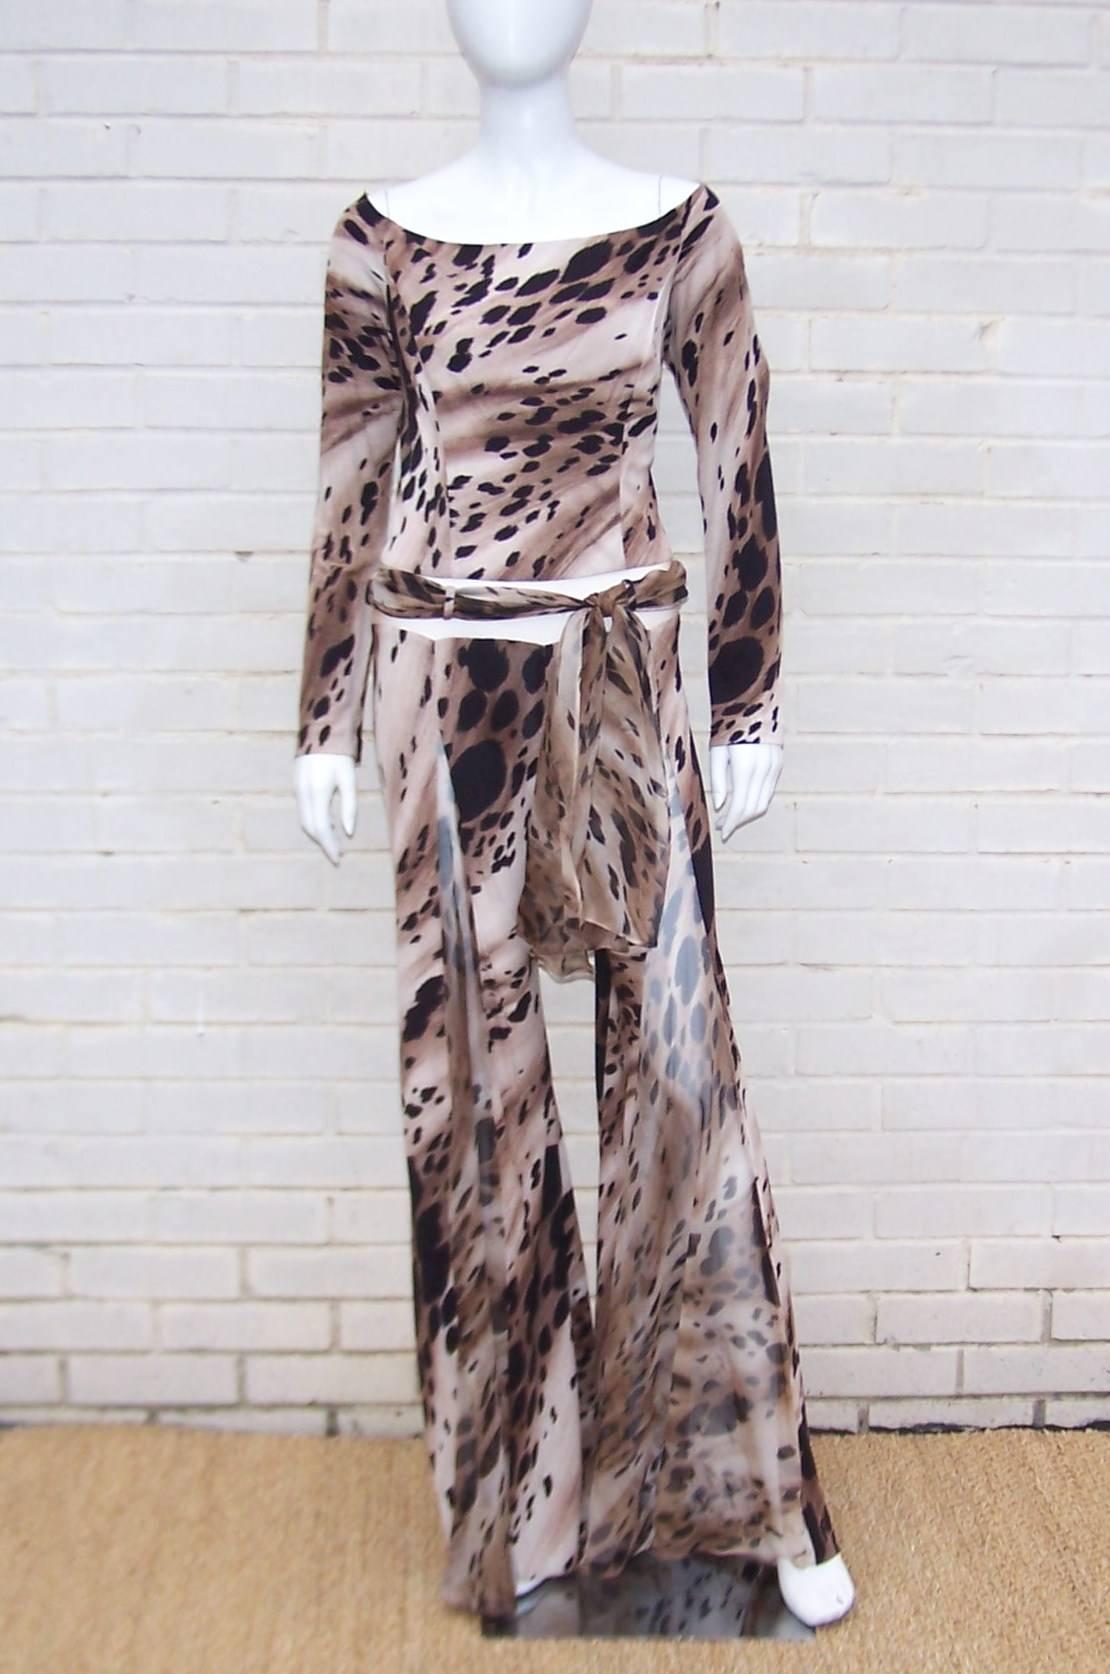 Channel your inner wild child with this outrageous 1970's inspired animal print catsuit from Jiki of Monte Carlo.  The design incorporates peek-a-boo effects by inserting nude netting just below the waist and coordinating sheer animal print chiffon